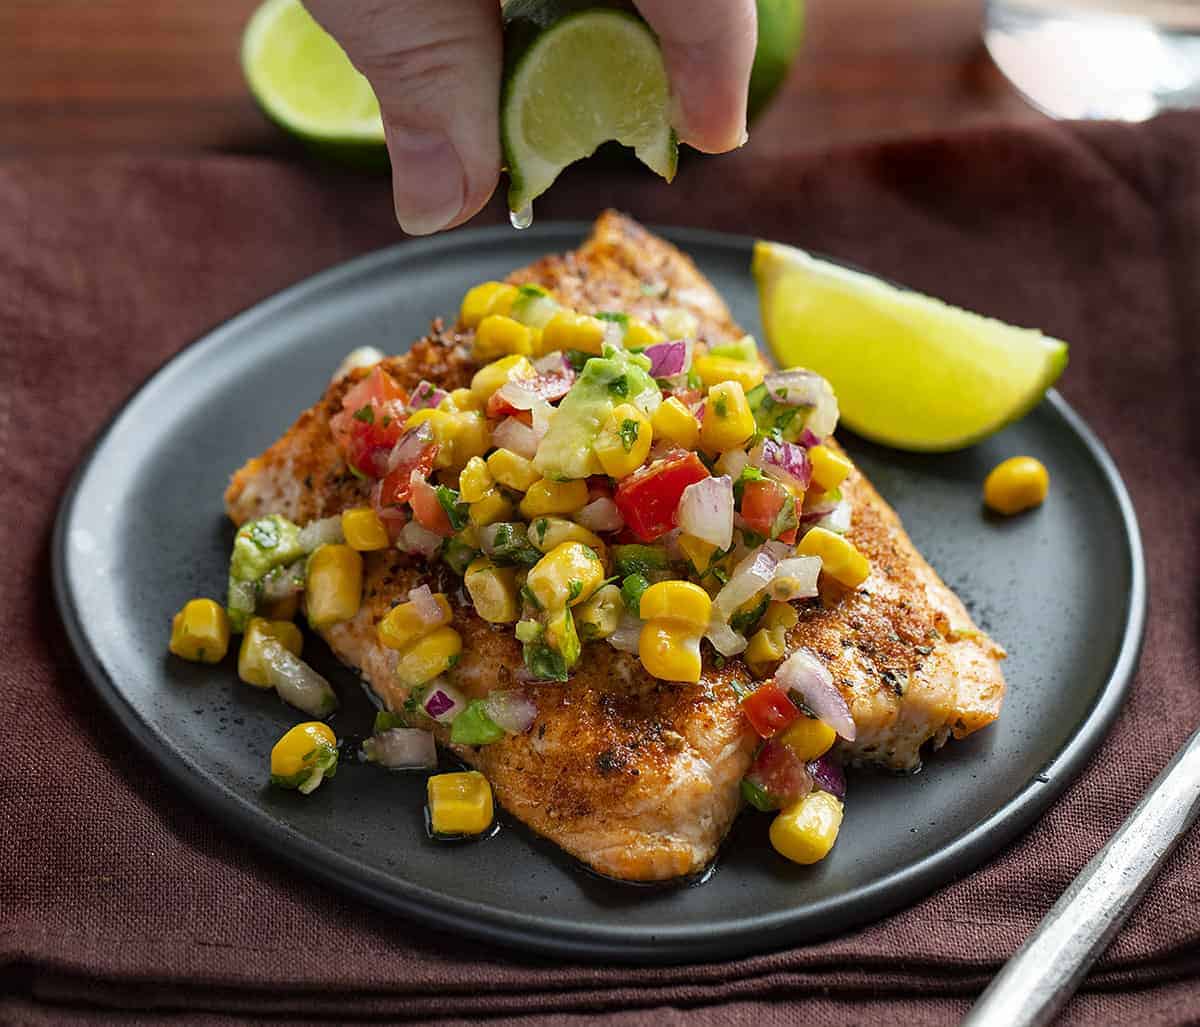 Adding Lime to Blackened Salmon covered in Avocado Corn Salsa